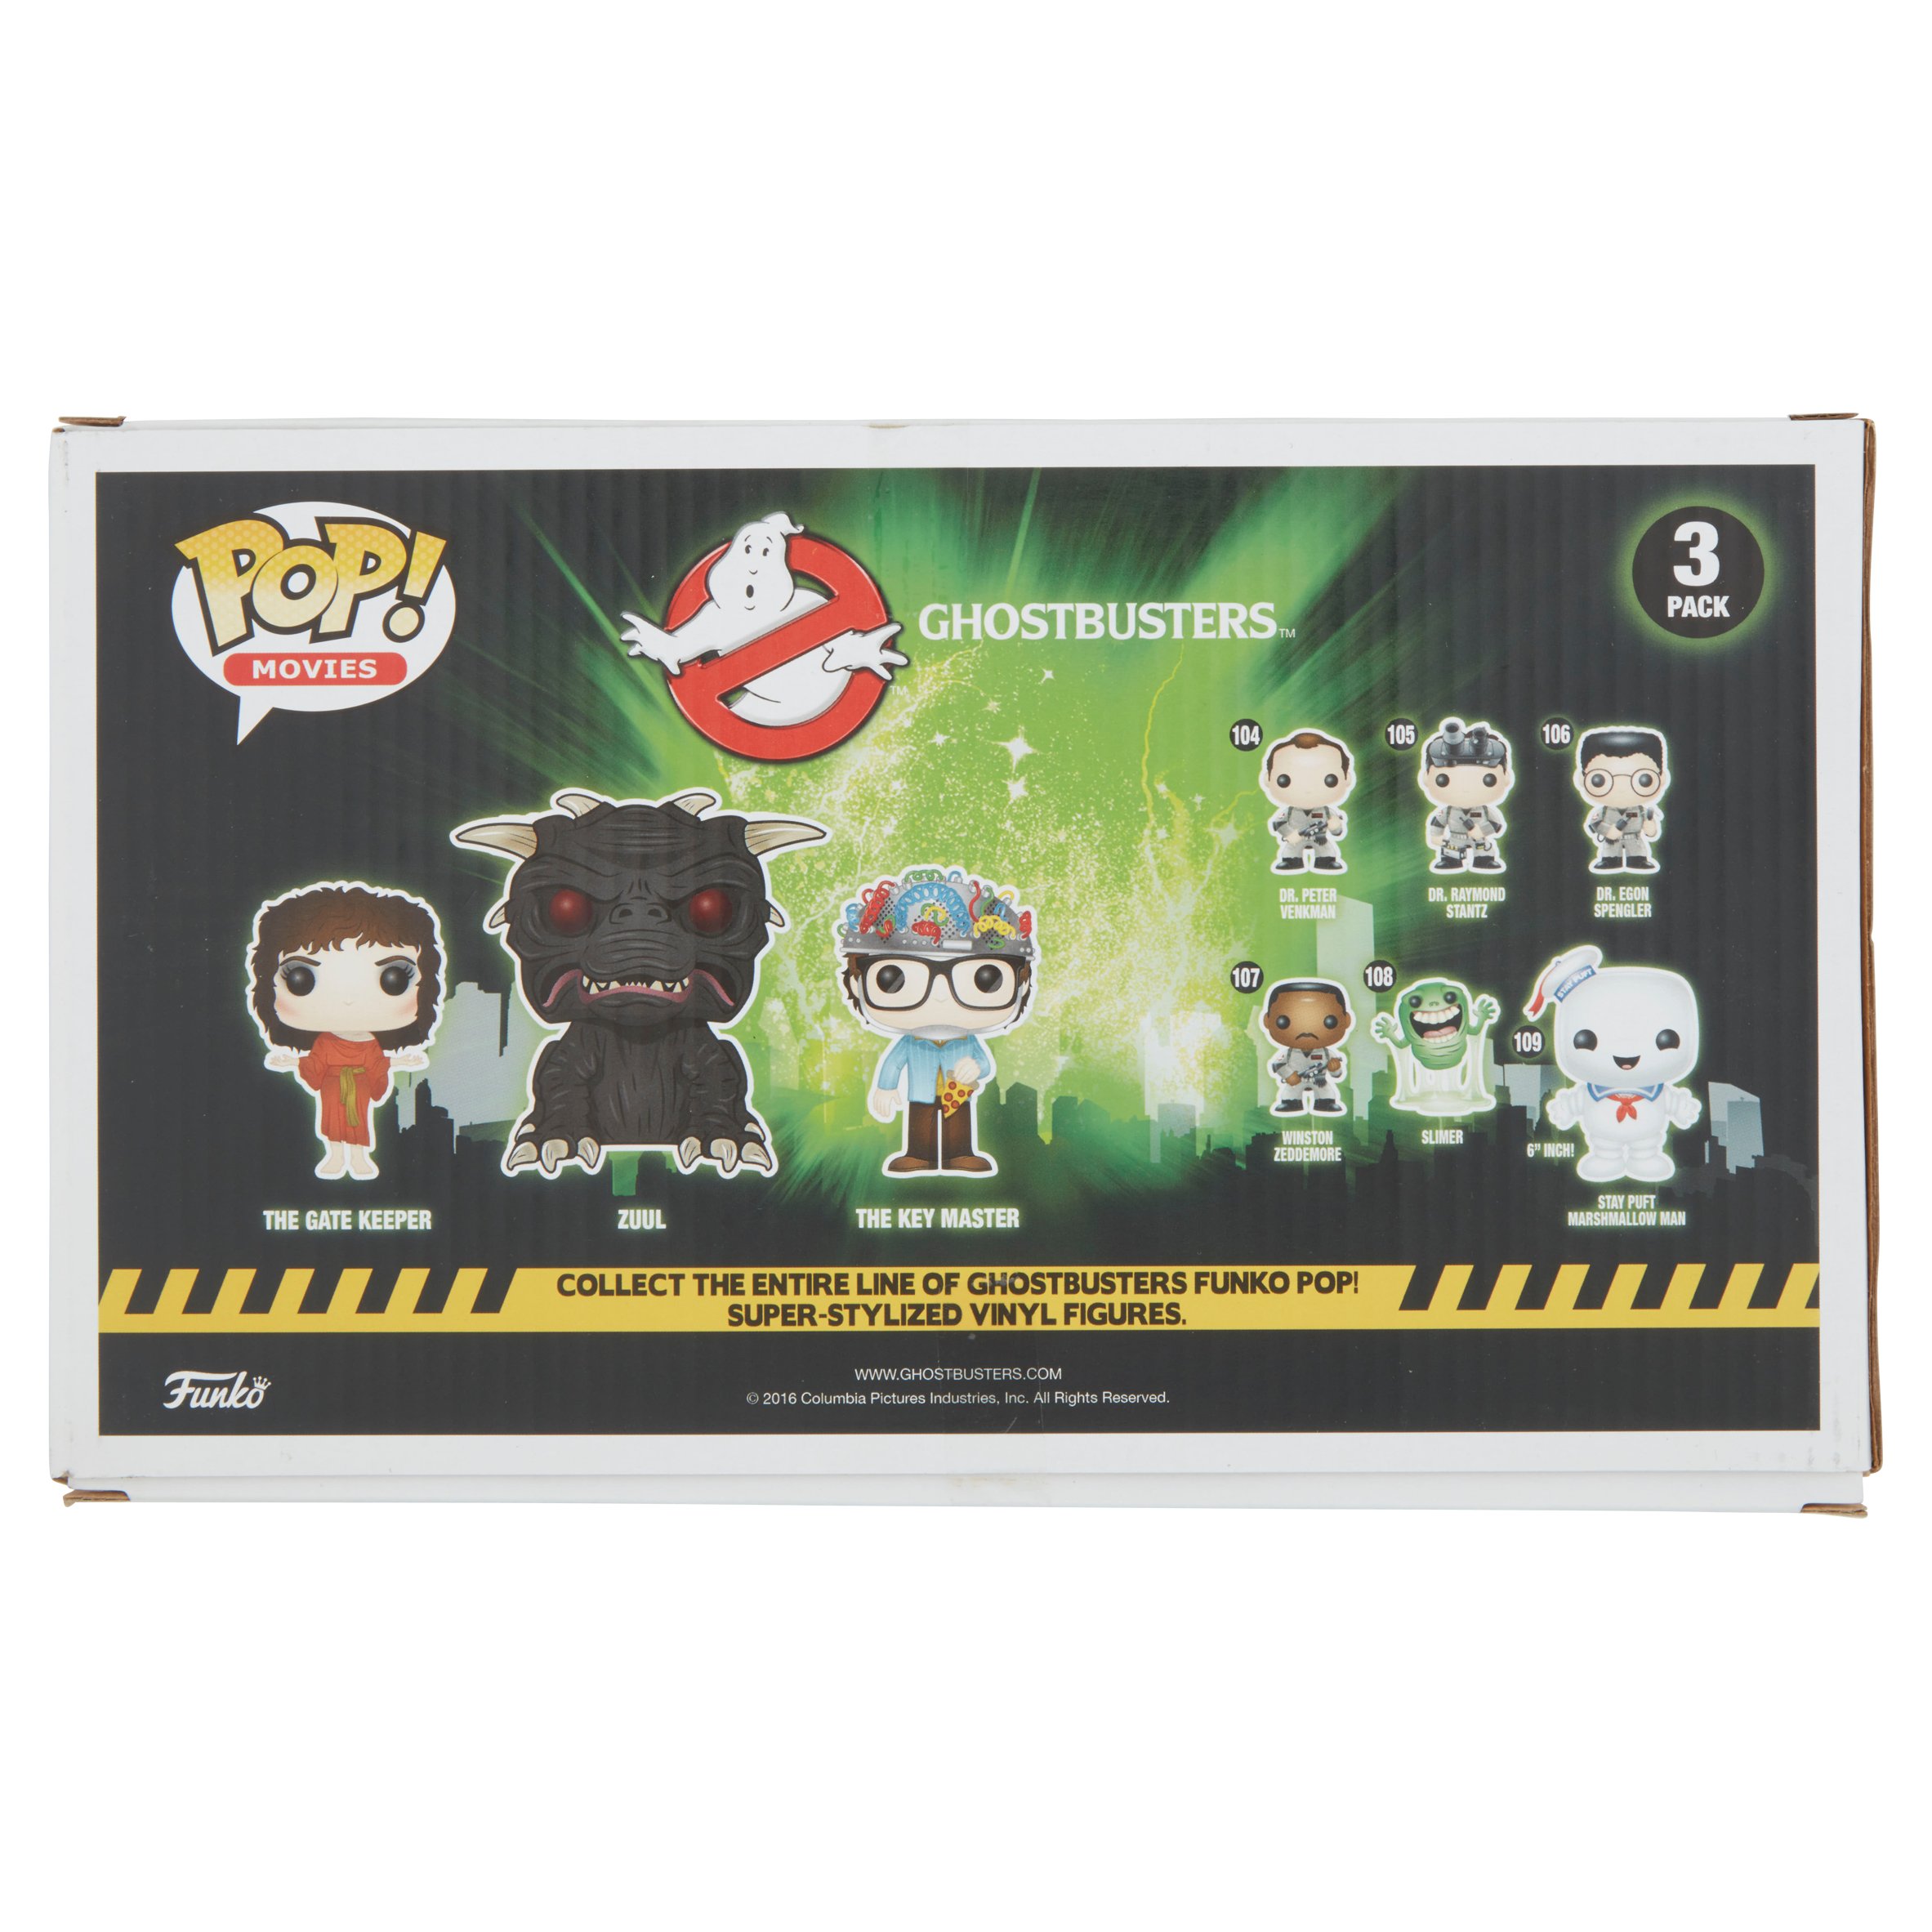 POP Movies: Classic Ghostbusters 3 Pack Walmart Exclusive, The Gatekeeper, Zuul, The Key Master - image 4 of 6